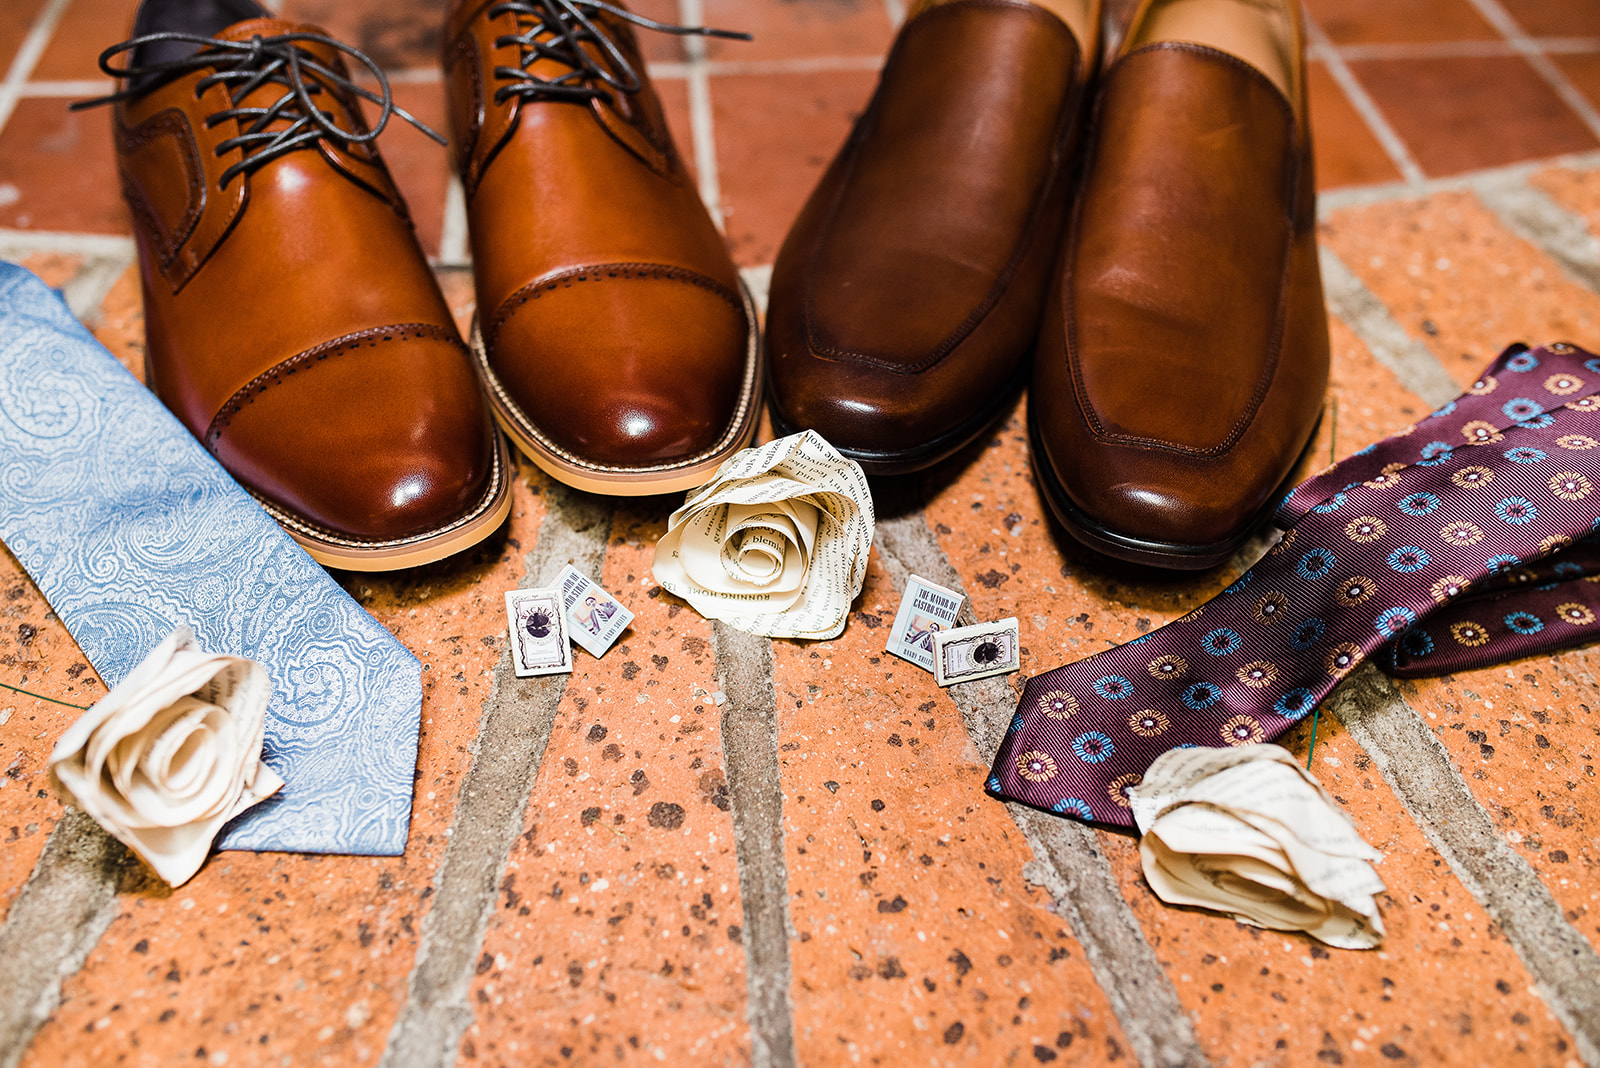 Wedding details of shoes, ties cufflinks and carnations make of pages from a book sit on a brick floor